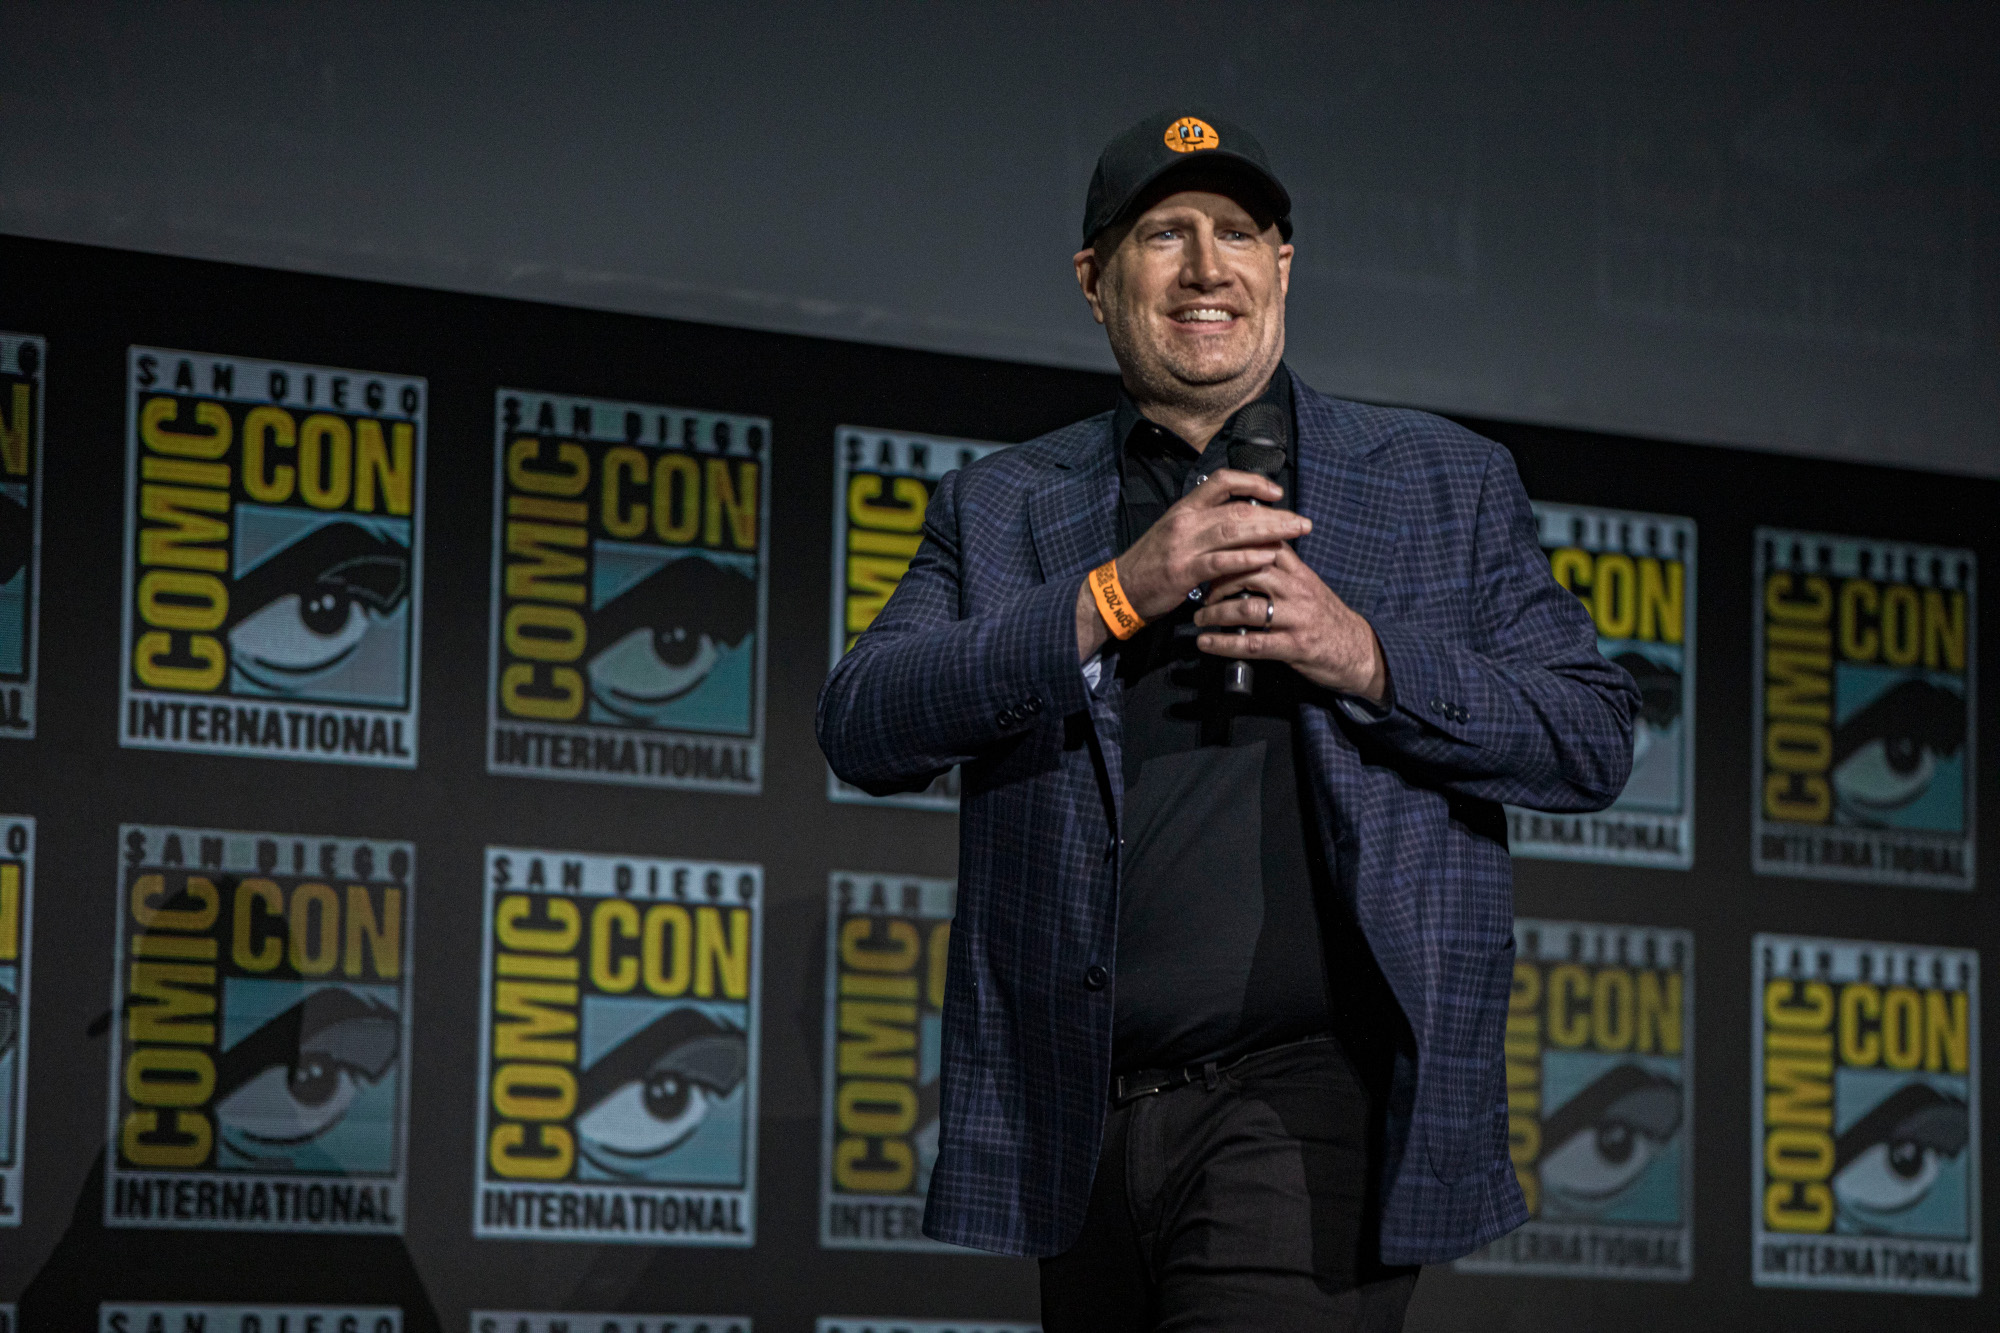 Marvel Studios president Kevin Feige at San Diego Comic-Con, where he announced Marvel's Phase 5 lineup. He's holding a microphone and wearing a baseball cap.